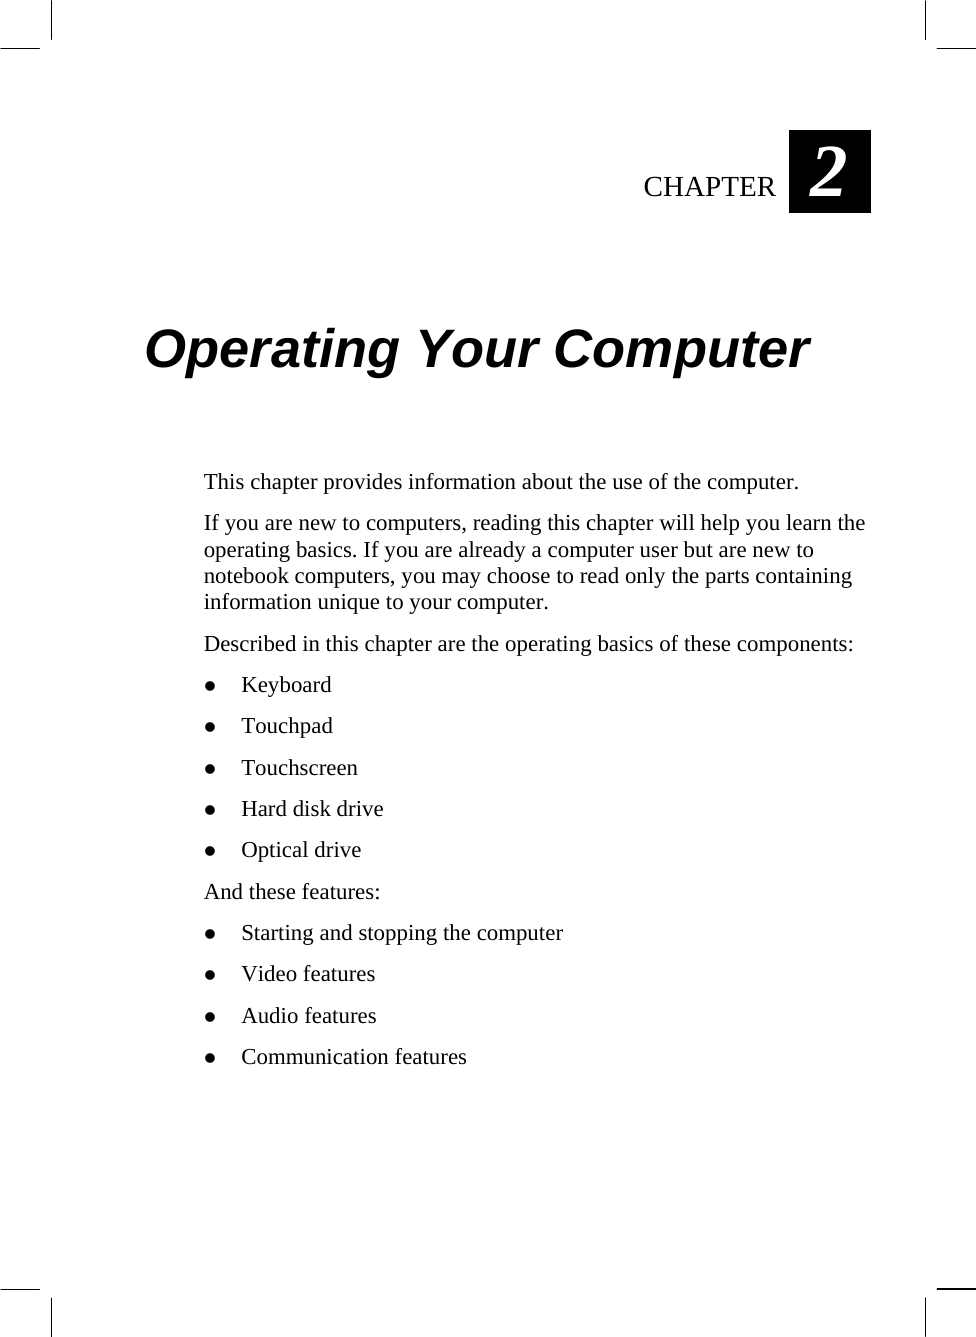  CHAPTER  2 Operating Your Computer This chapter provides information about the use of the computer. If you are new to computers, reading this chapter will help you learn the operating basics. If you are already a computer user but are new to notebook computers, you may choose to read only the parts containing information unique to your computer. Described in this chapter are the operating basics of these components:   Keyboard   Touchpad   Touchscreen   Hard disk drive   Optical drive And these features:   Starting and stopping the computer   Video features   Audio features   Communication features   